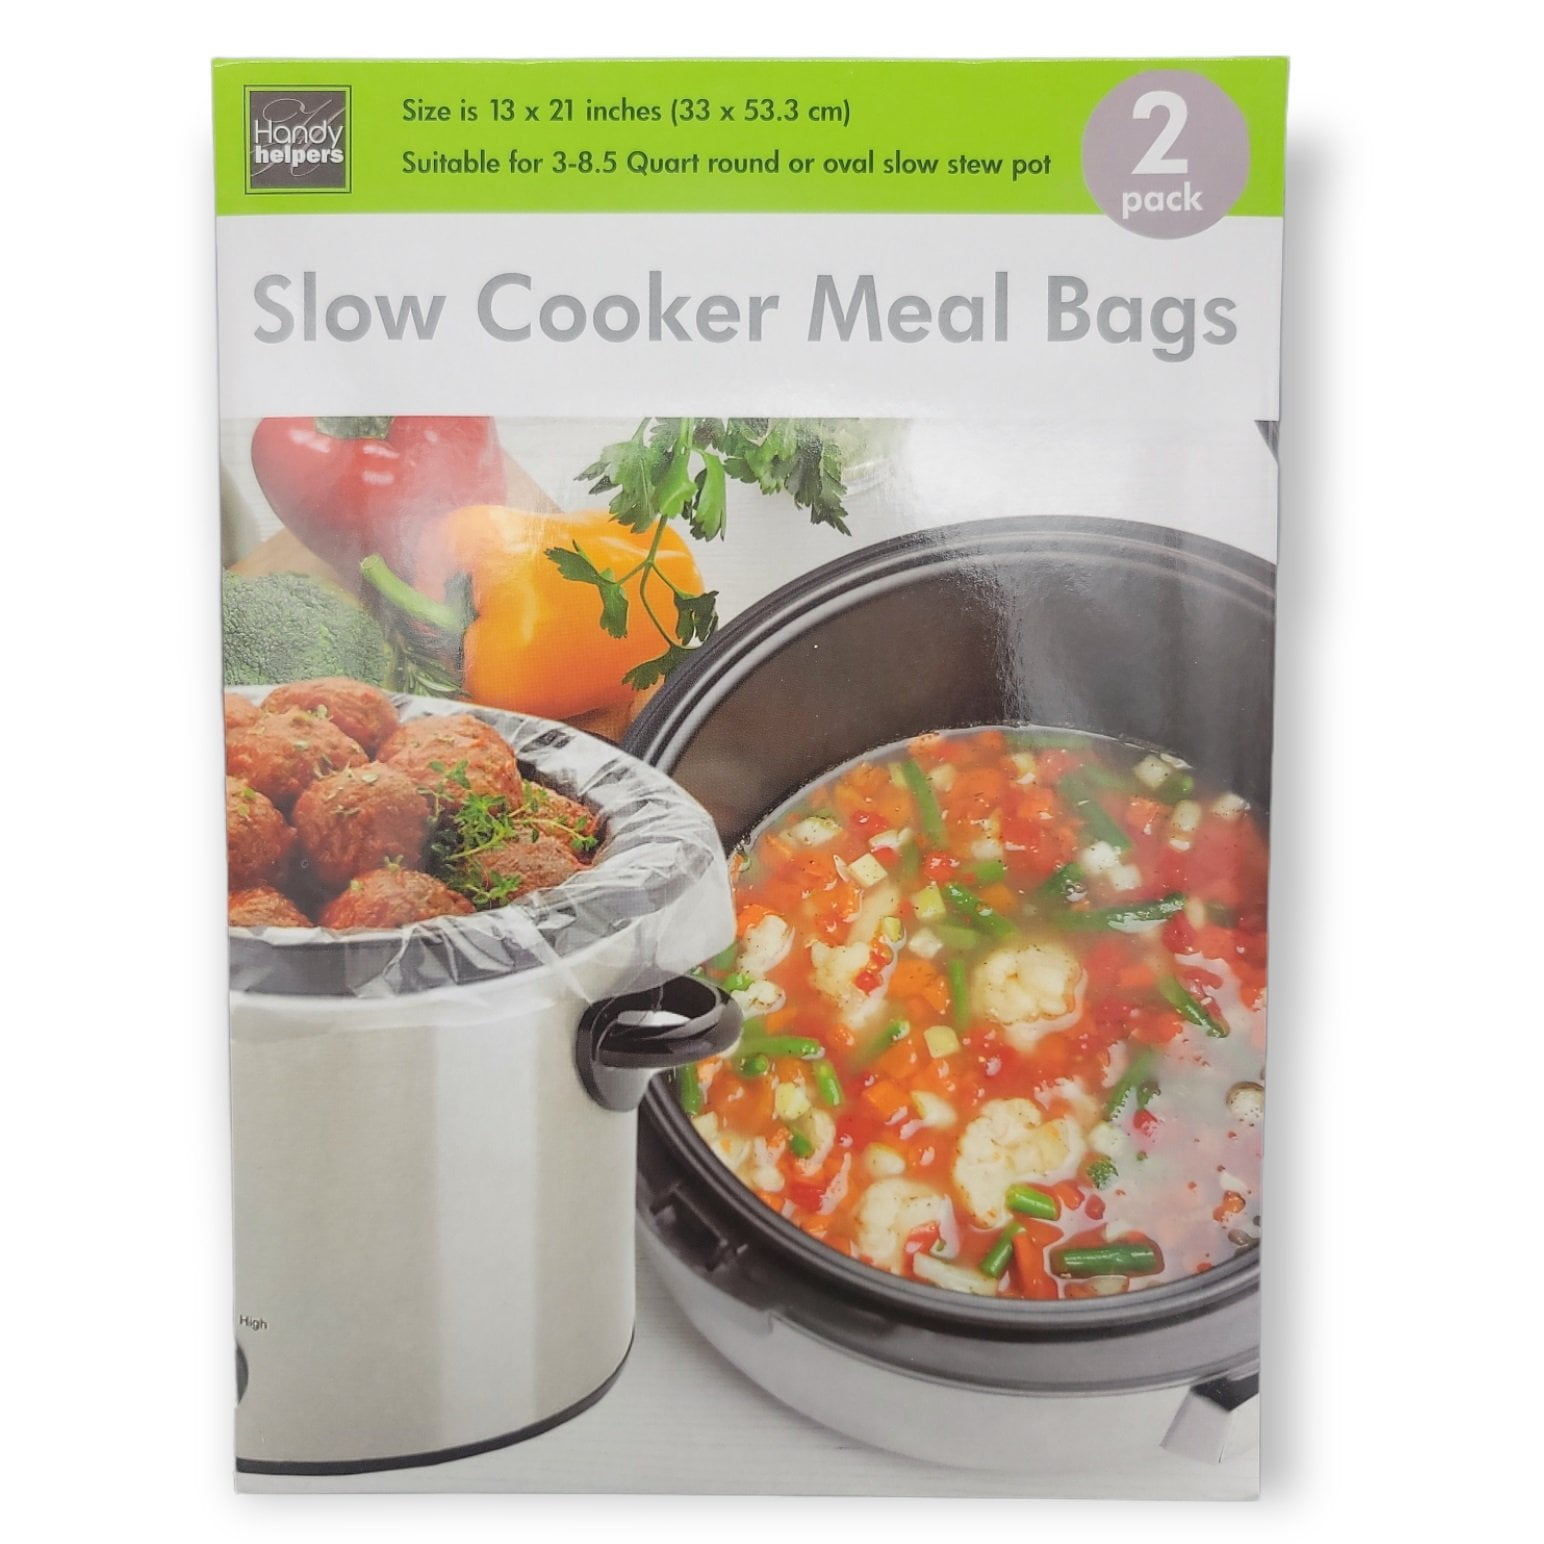 OOFLAYE 16 Counts Slow Cooker Liners Small Size 11 x 16 inch Kitchen Disposable Cooking Bags Fits 1 to 3 Quarts Safe for Oval or Round Pot 16